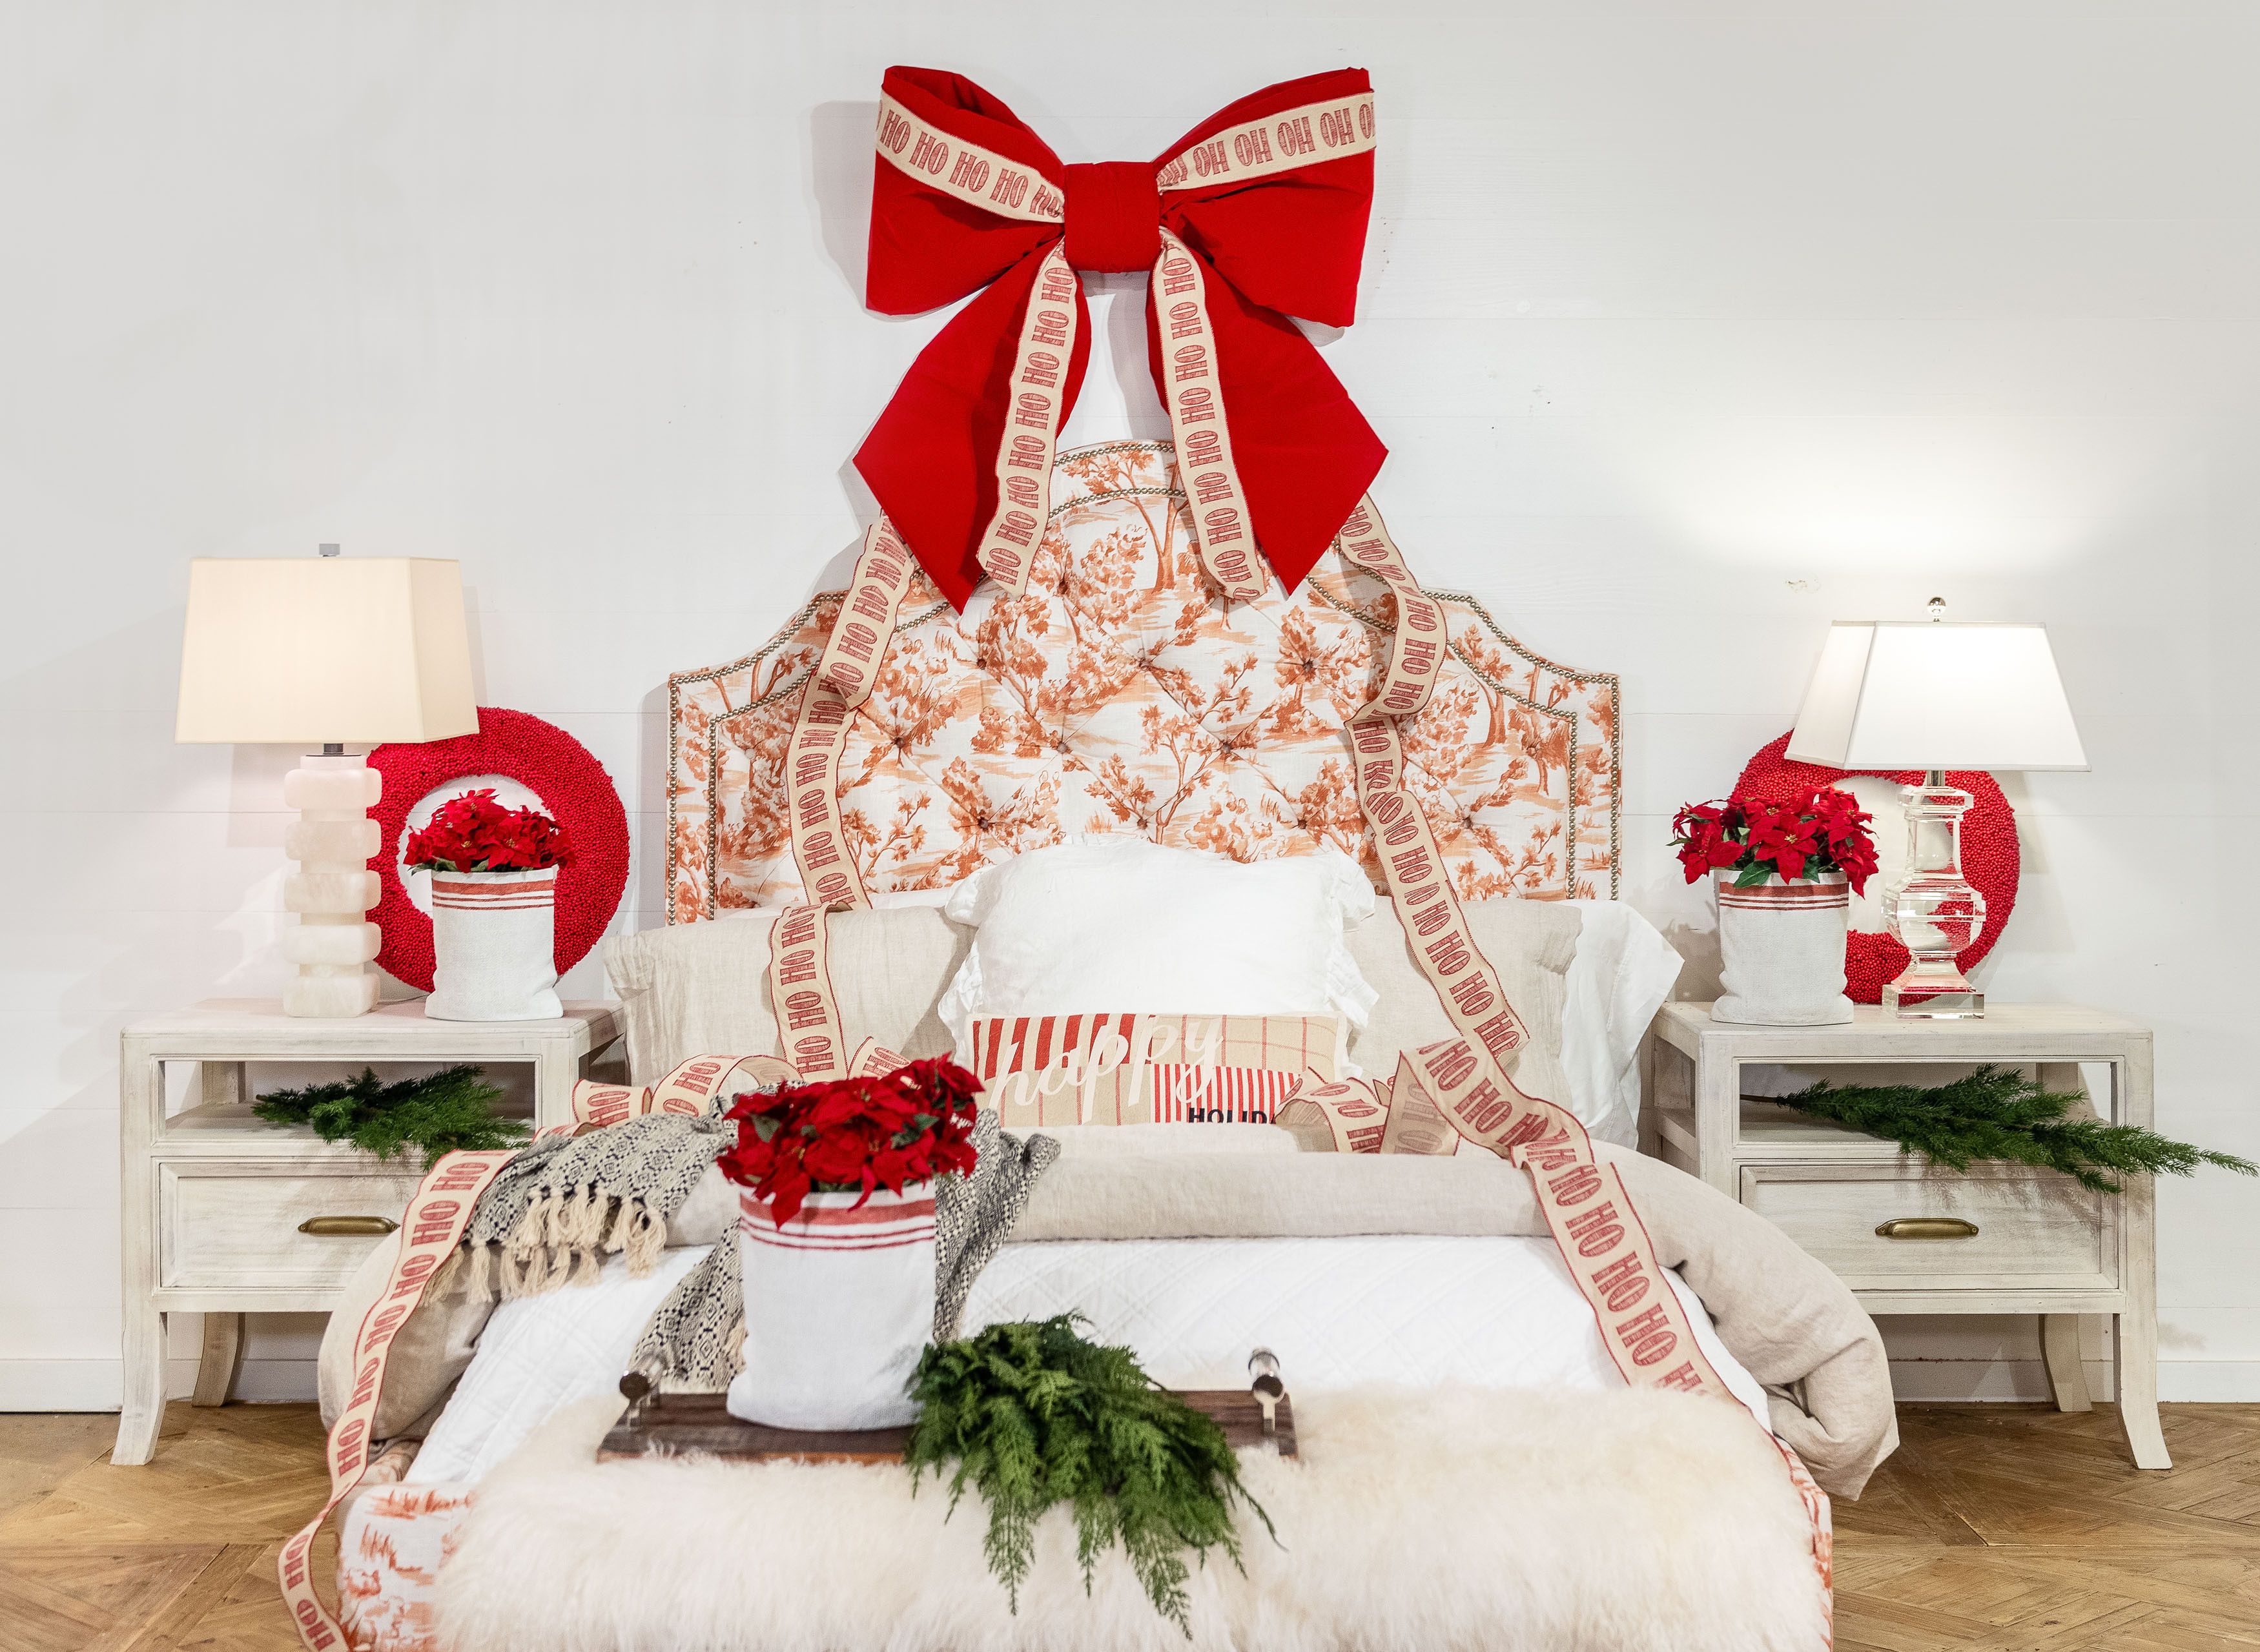 Simple Bedroom Christmas Decorations